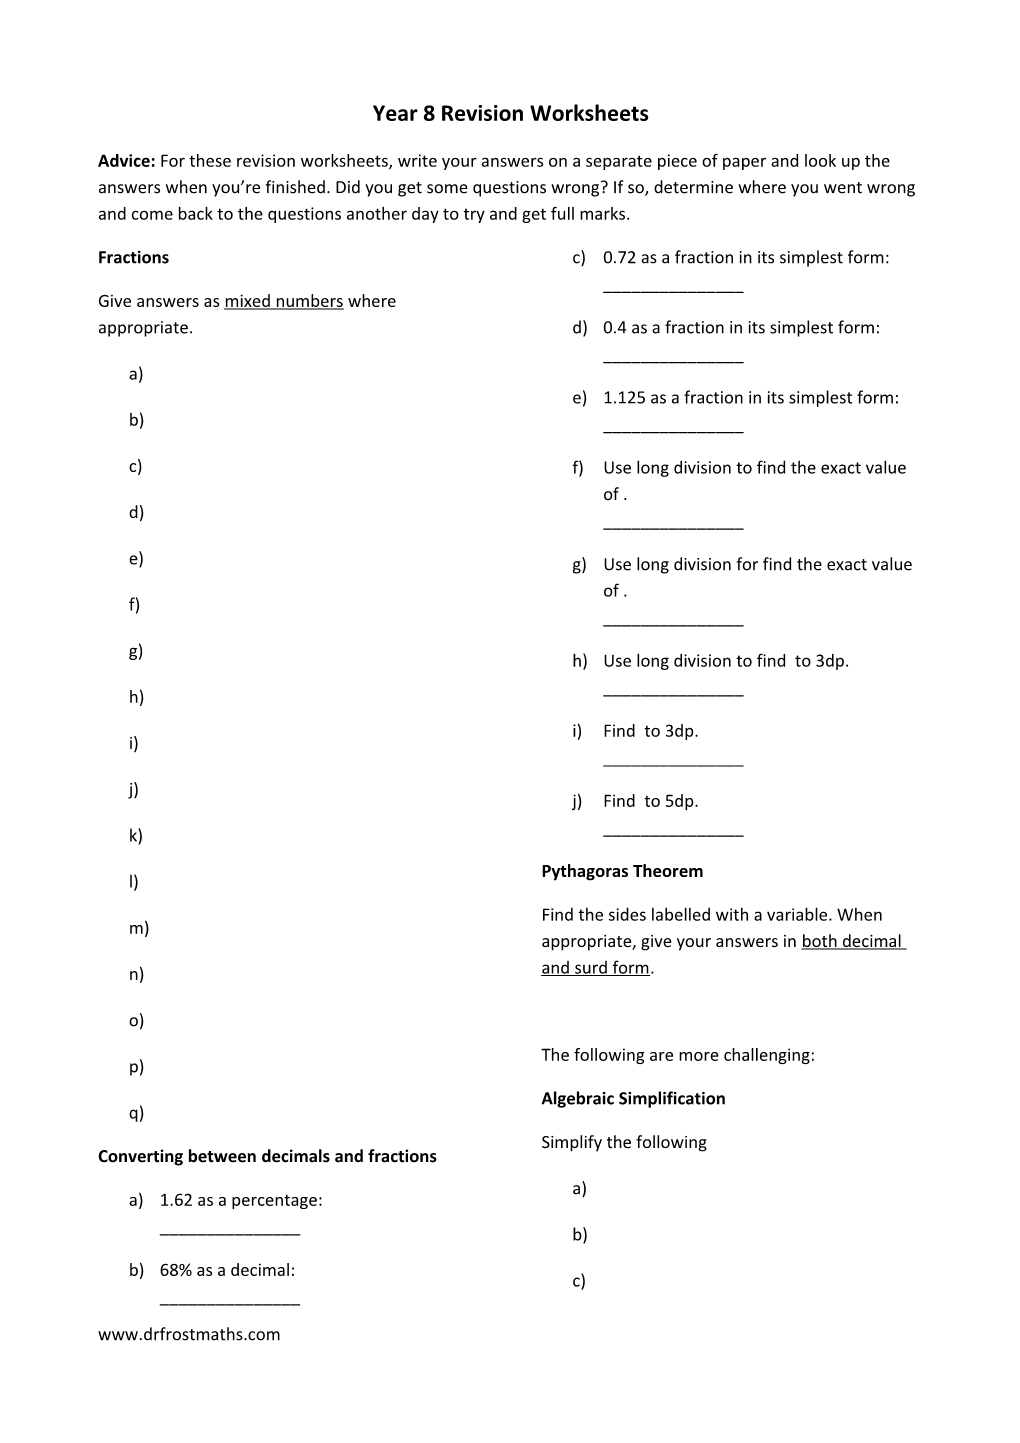 Year 8 Revision Worksheets